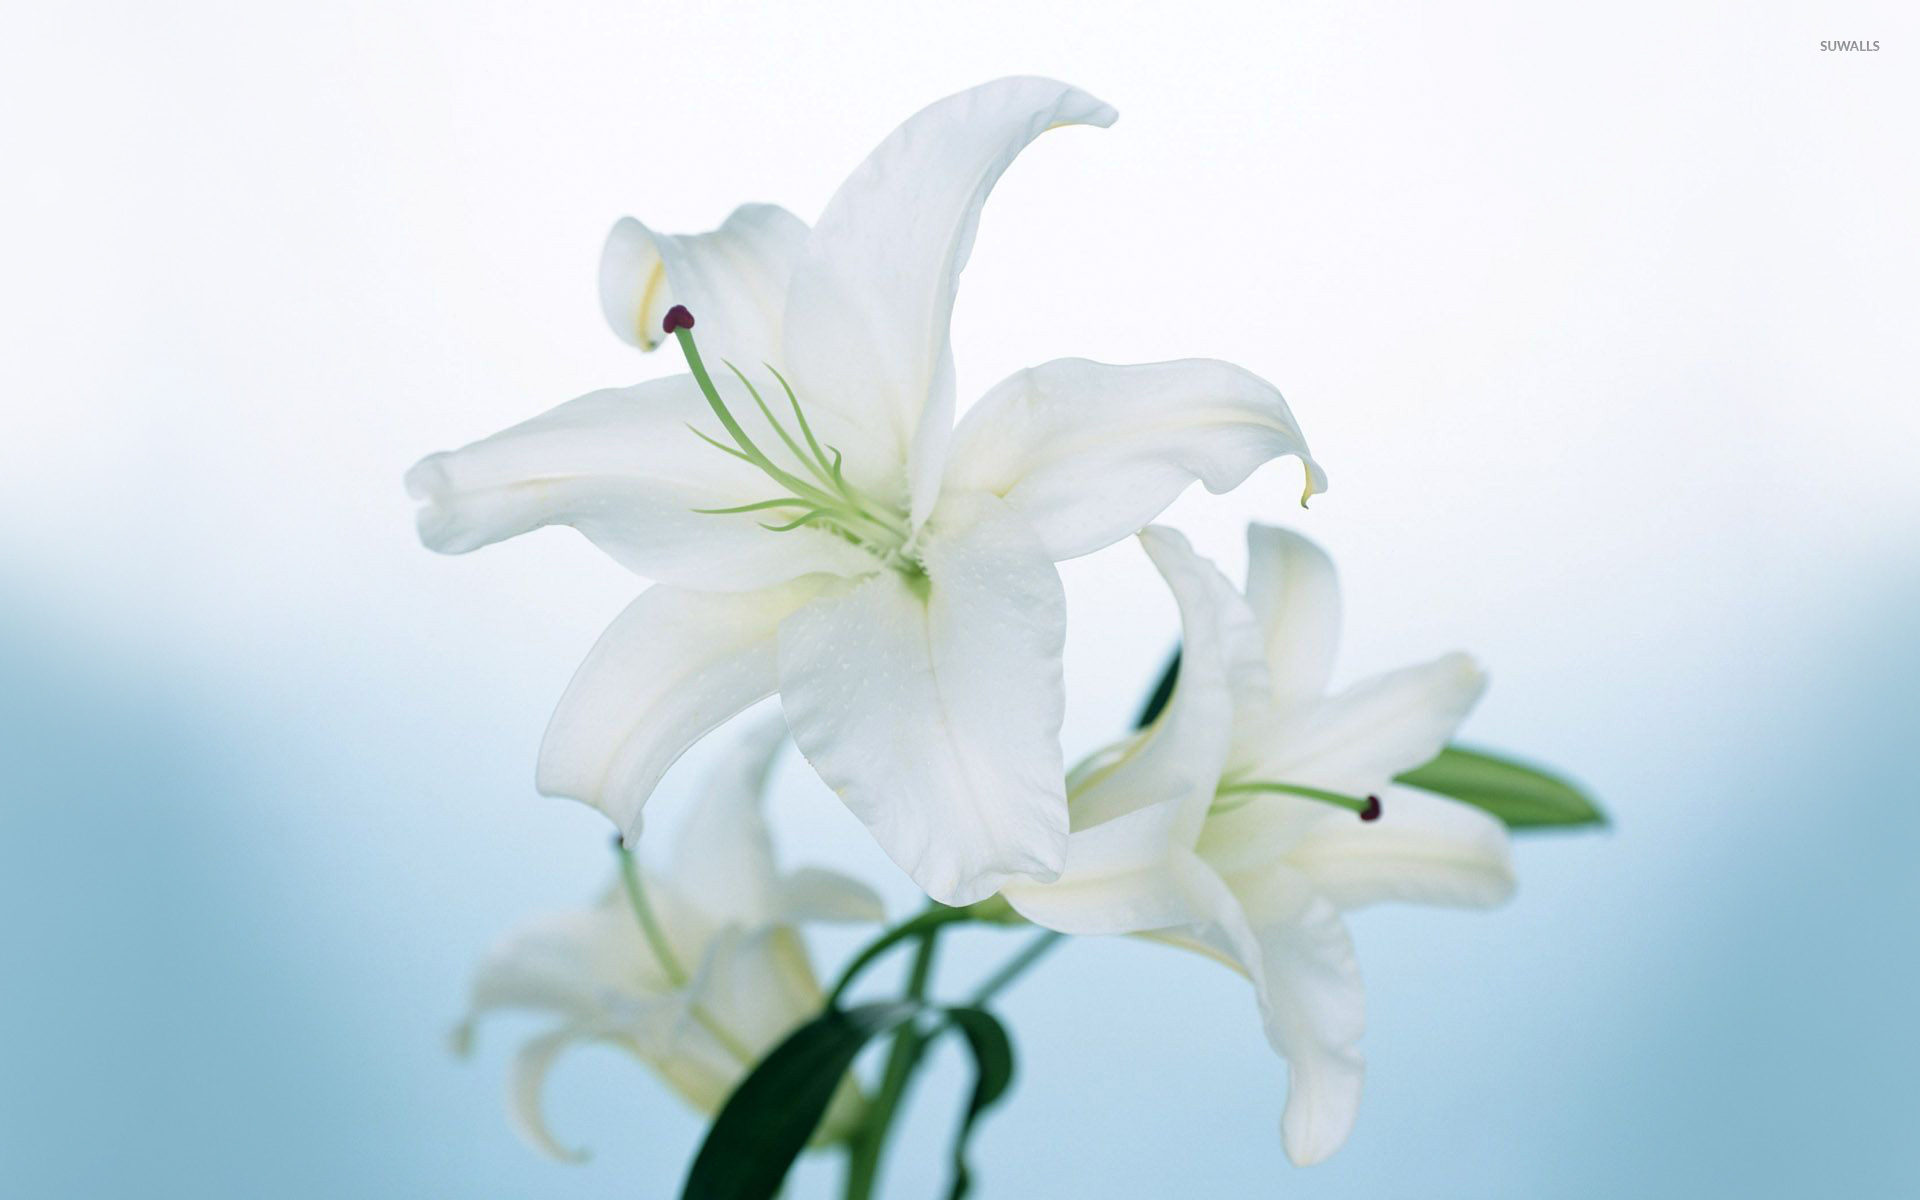 100+] White Lily Wallpapers | Wallpapers.com